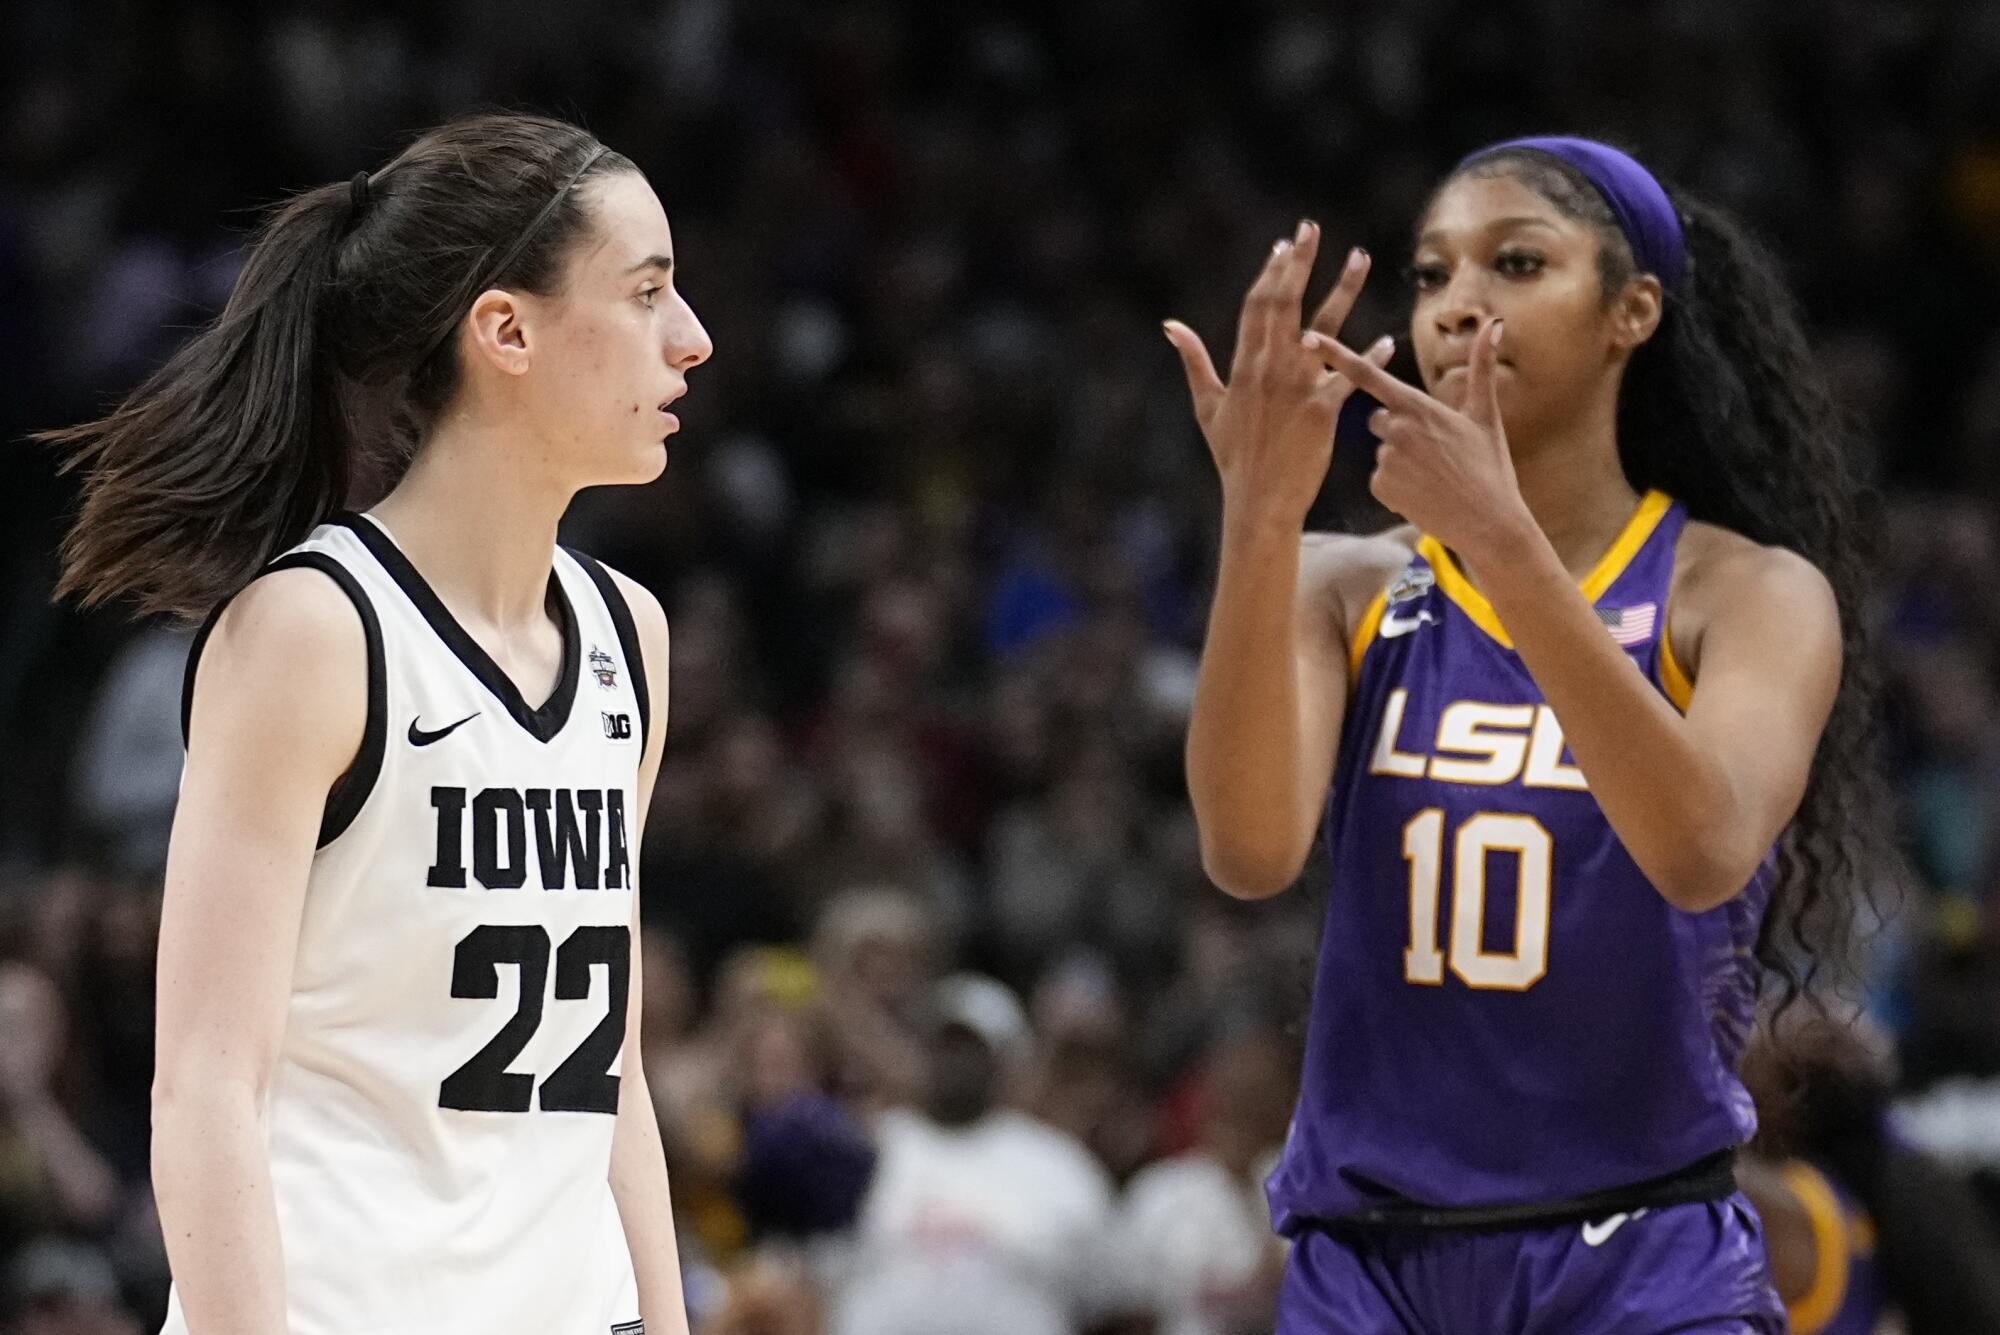 LSU's Angel Reese gestures in front of Iowa's Caitlin Clark during the second half of the Tigers' national title win.